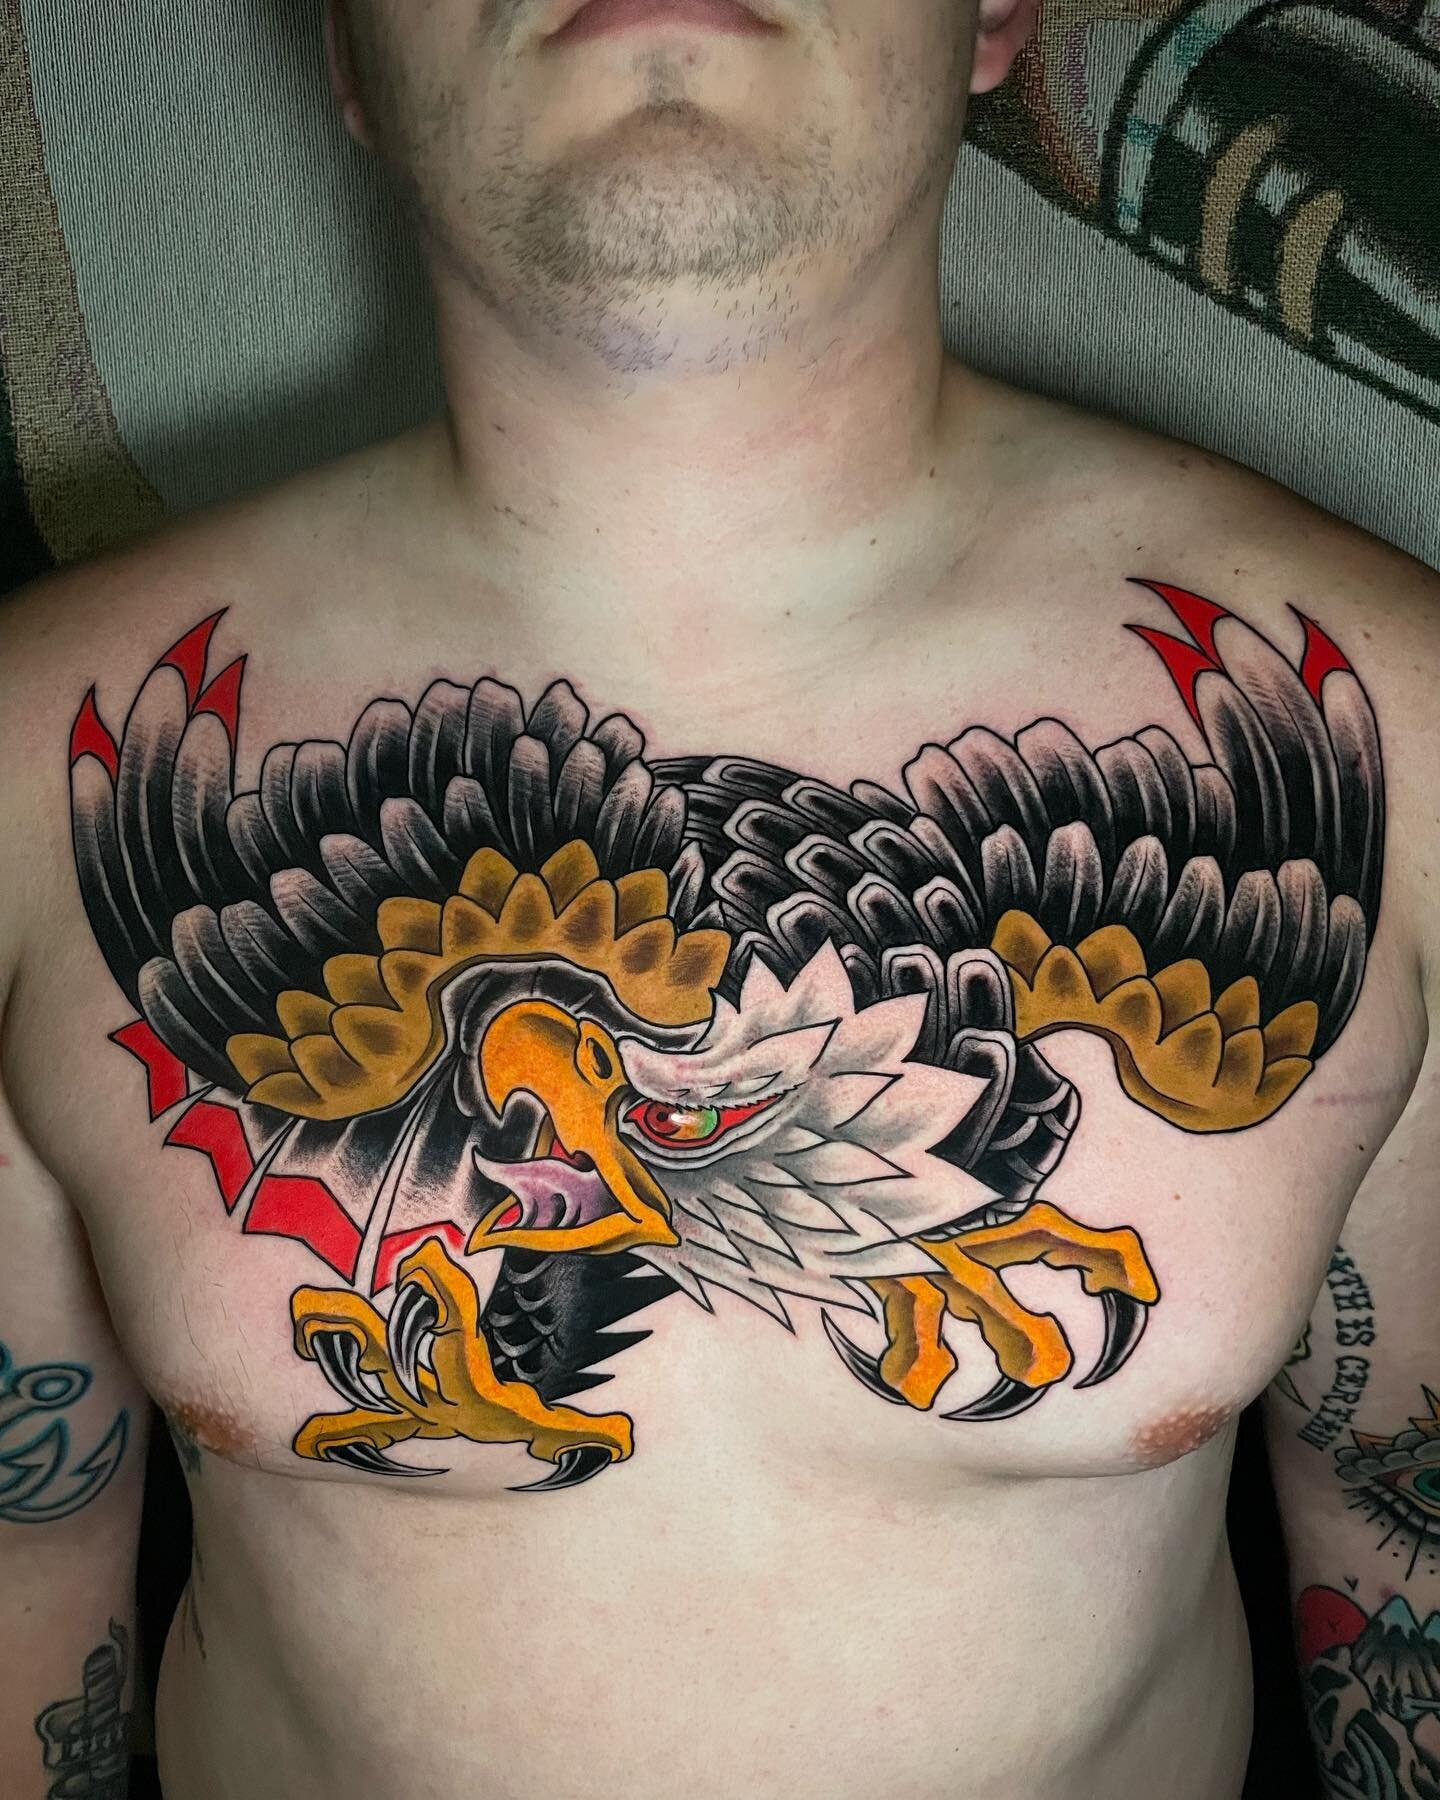 This tattoo is fly af. 

#eagletattoo #eagle #america #chestpiece #chesttattoo #americantraditional #americantraditionaltattoo #traditionaltattoo #traddytatties #tattoooftheday #tattoosnob #inked #inkedmag #snailtrailstencilgel #industryinks #recover